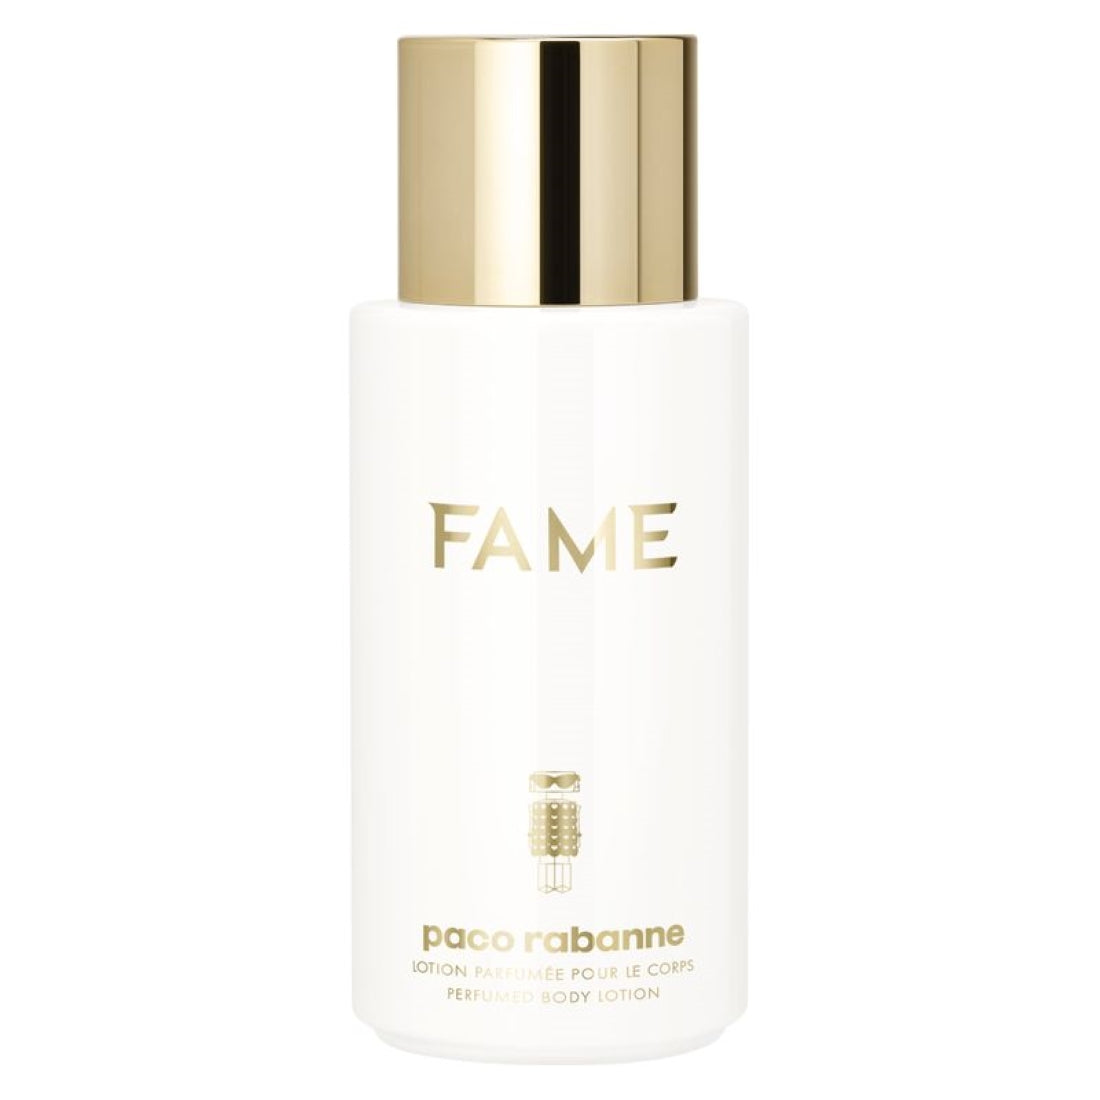 PACO RABANNE FAME PERFUMED BODY LOTION